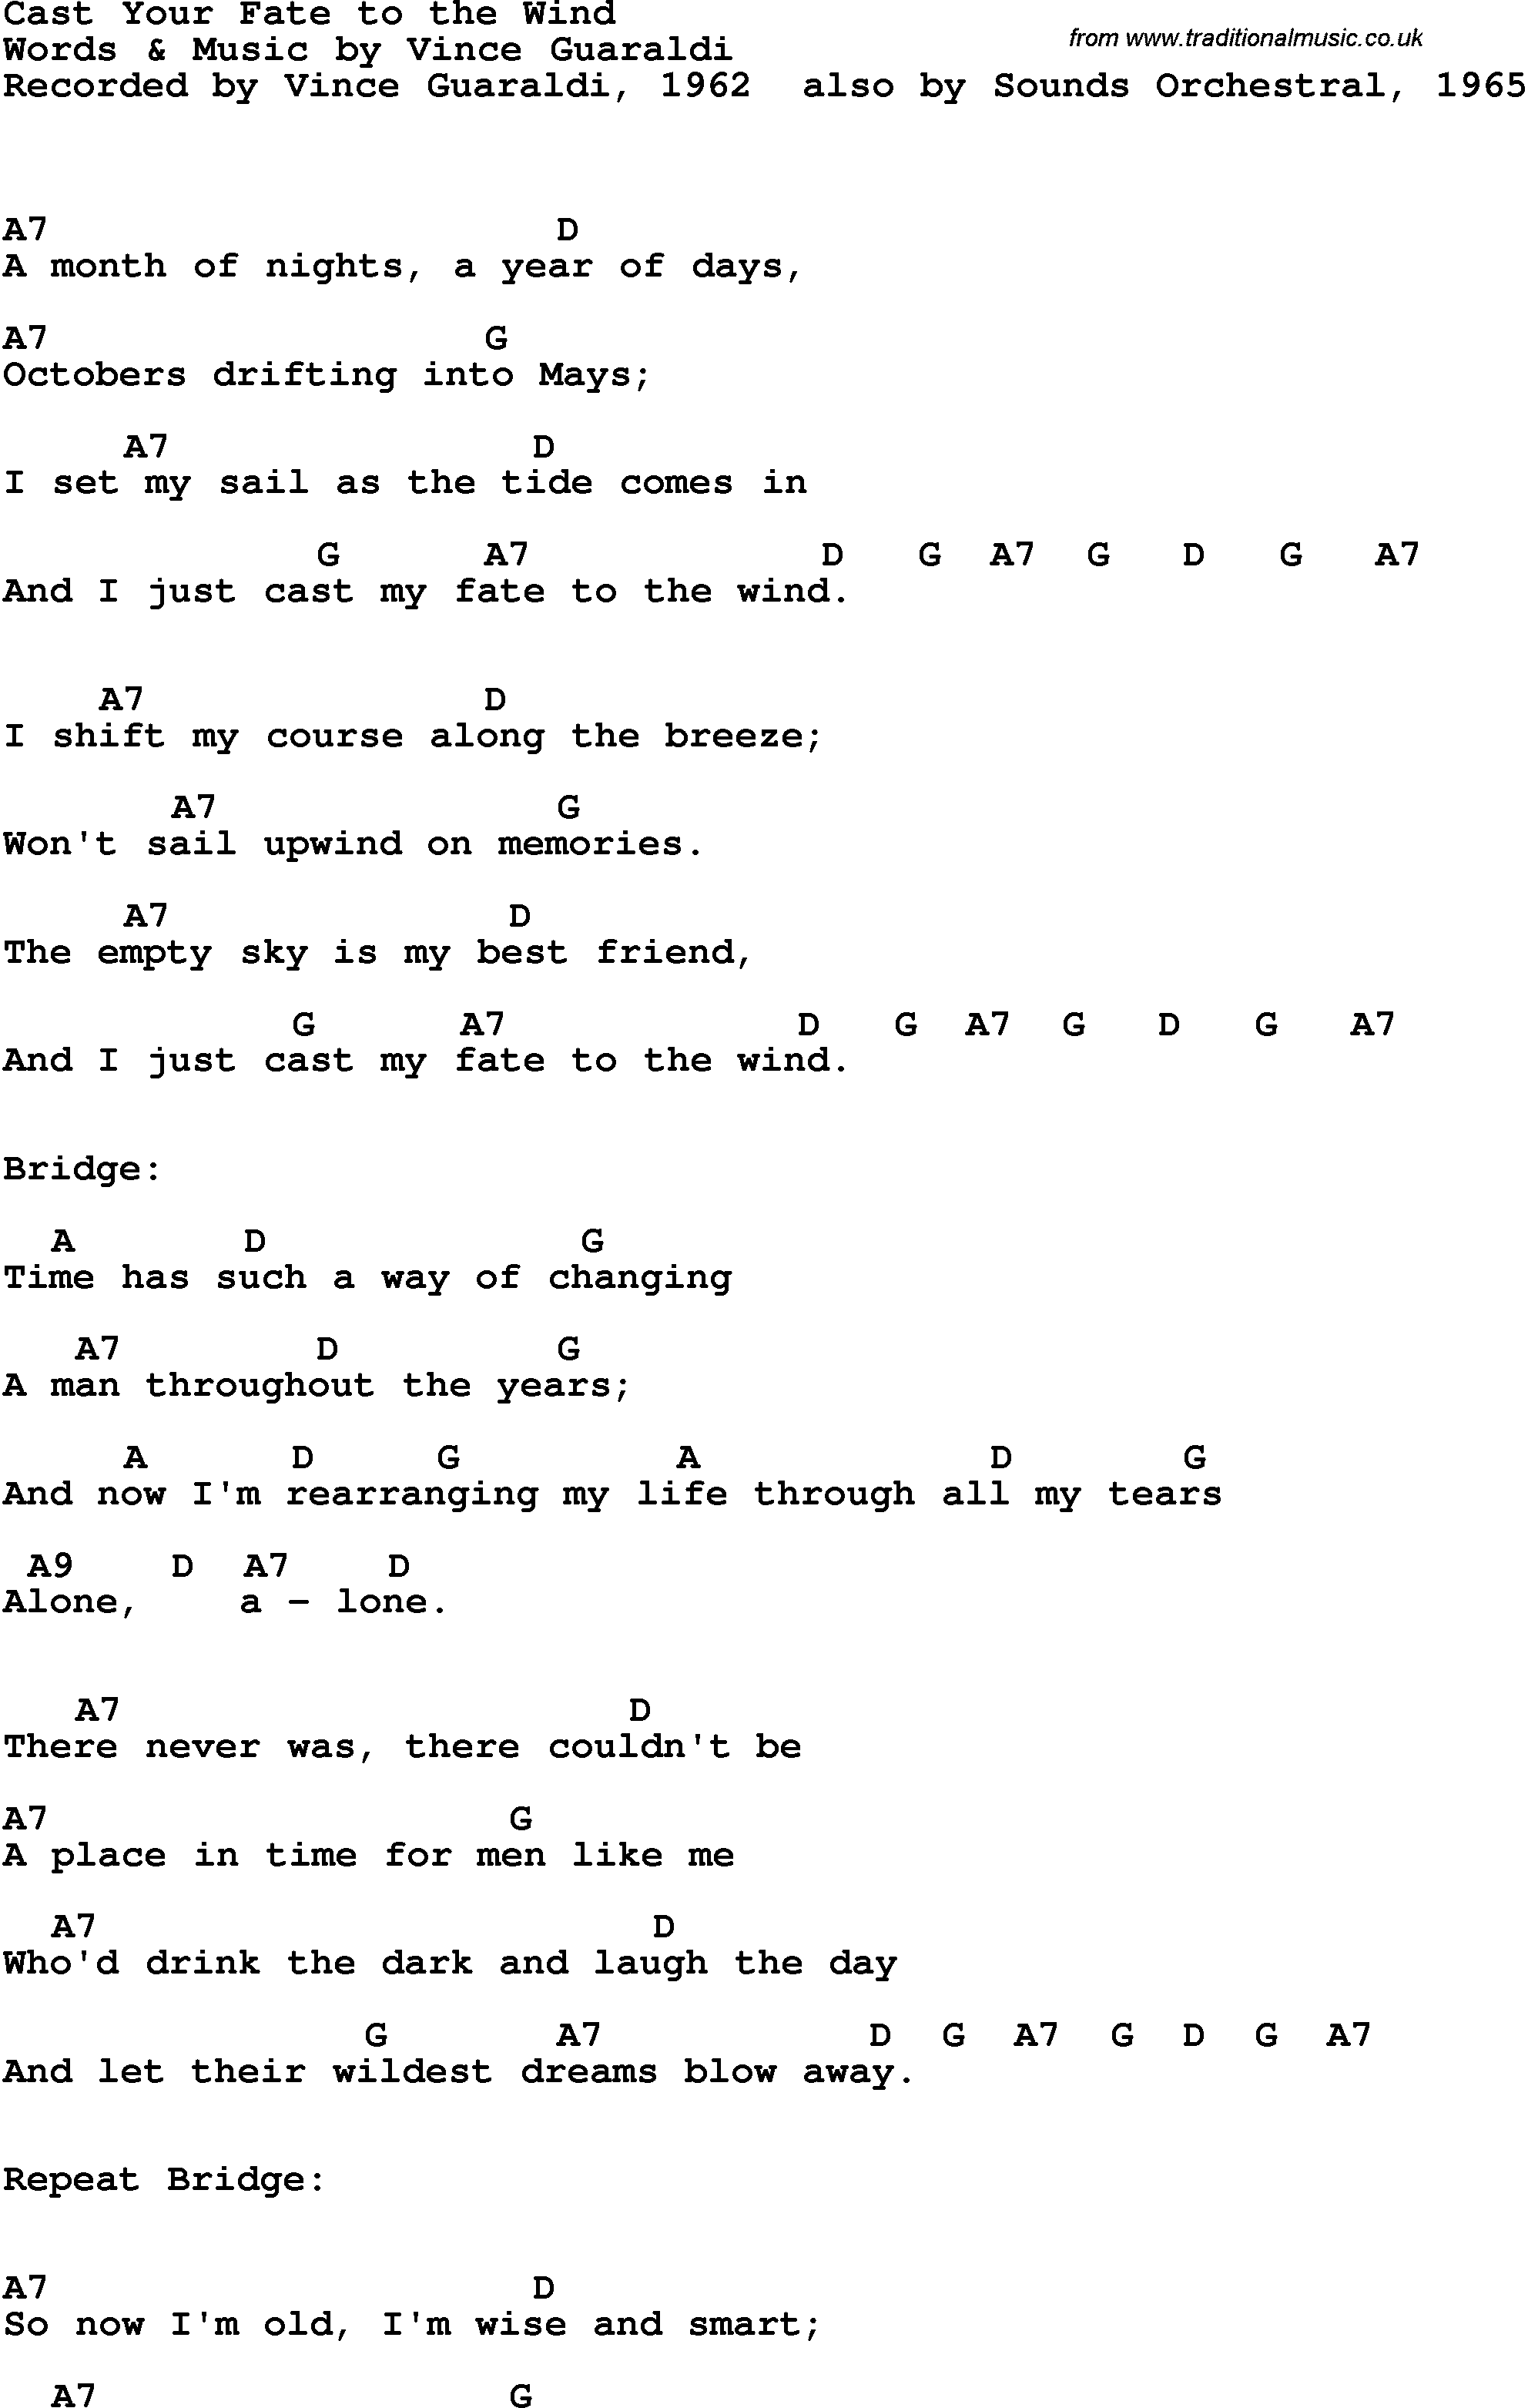 Song Lyrics with guitar chords for Cast Your Fate To The Wind - Vince Guaraldi Trio, 1962